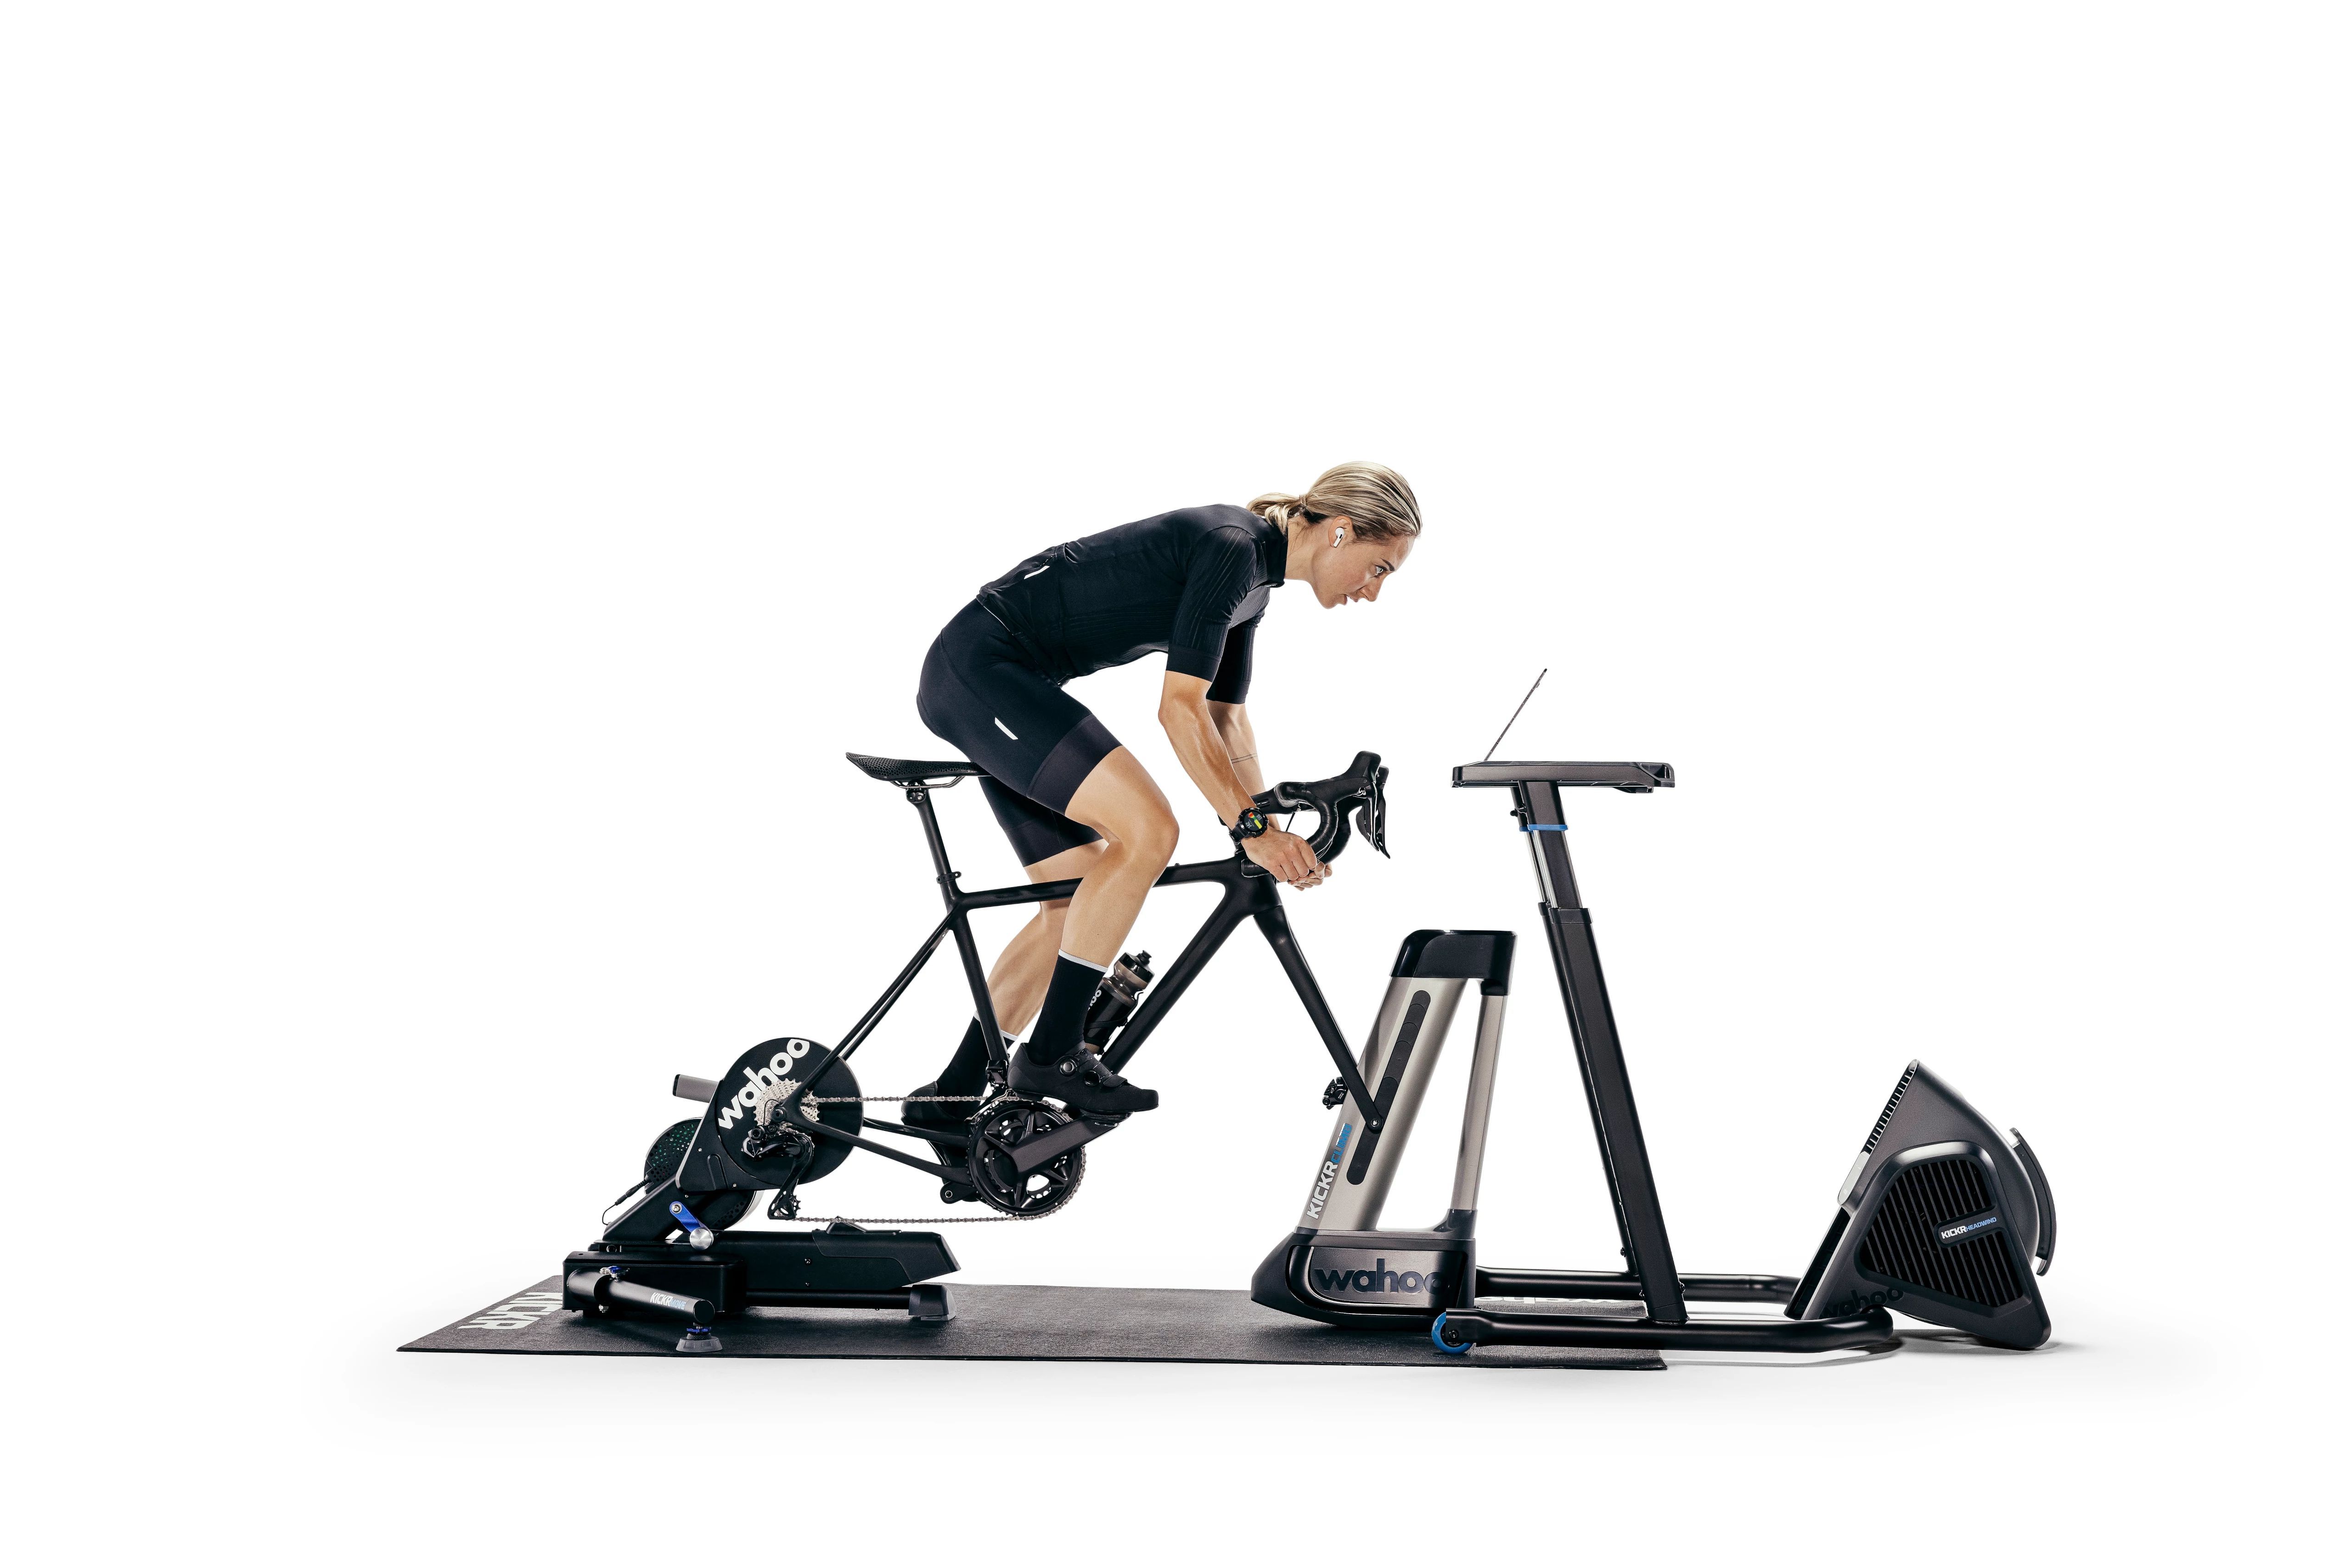 Which Wahoo smart trainer is best for you?